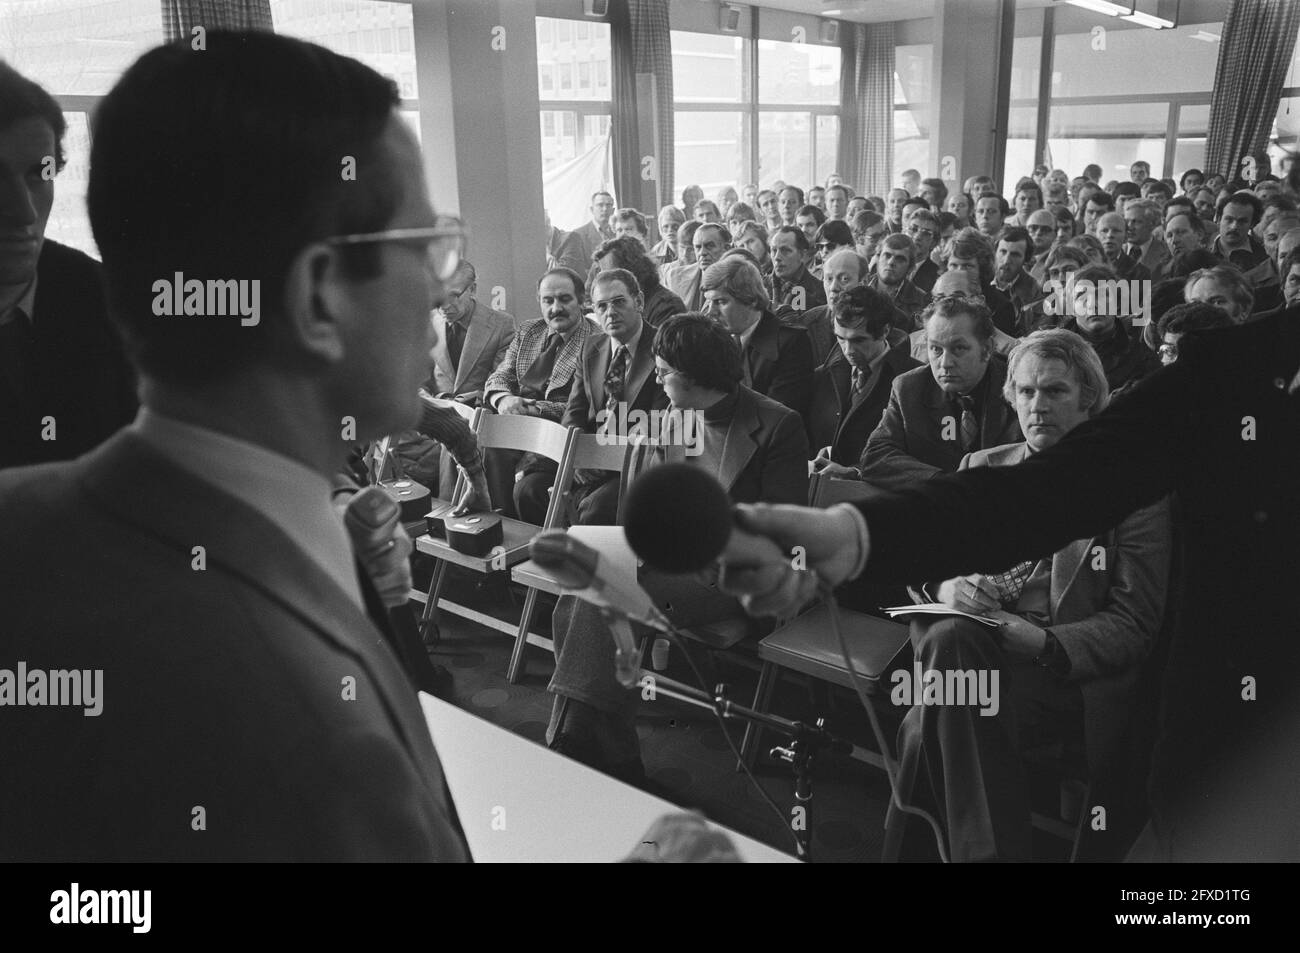 Staff meeting in the canteen, March 18, 1977, labor disputes, protests, employees, The Netherlands, 20th century press agency photo, news to remember, documentary, historic photography 1945-1990, visual stories, human history of the Twentieth Century, capturing moments in time Stock Photo